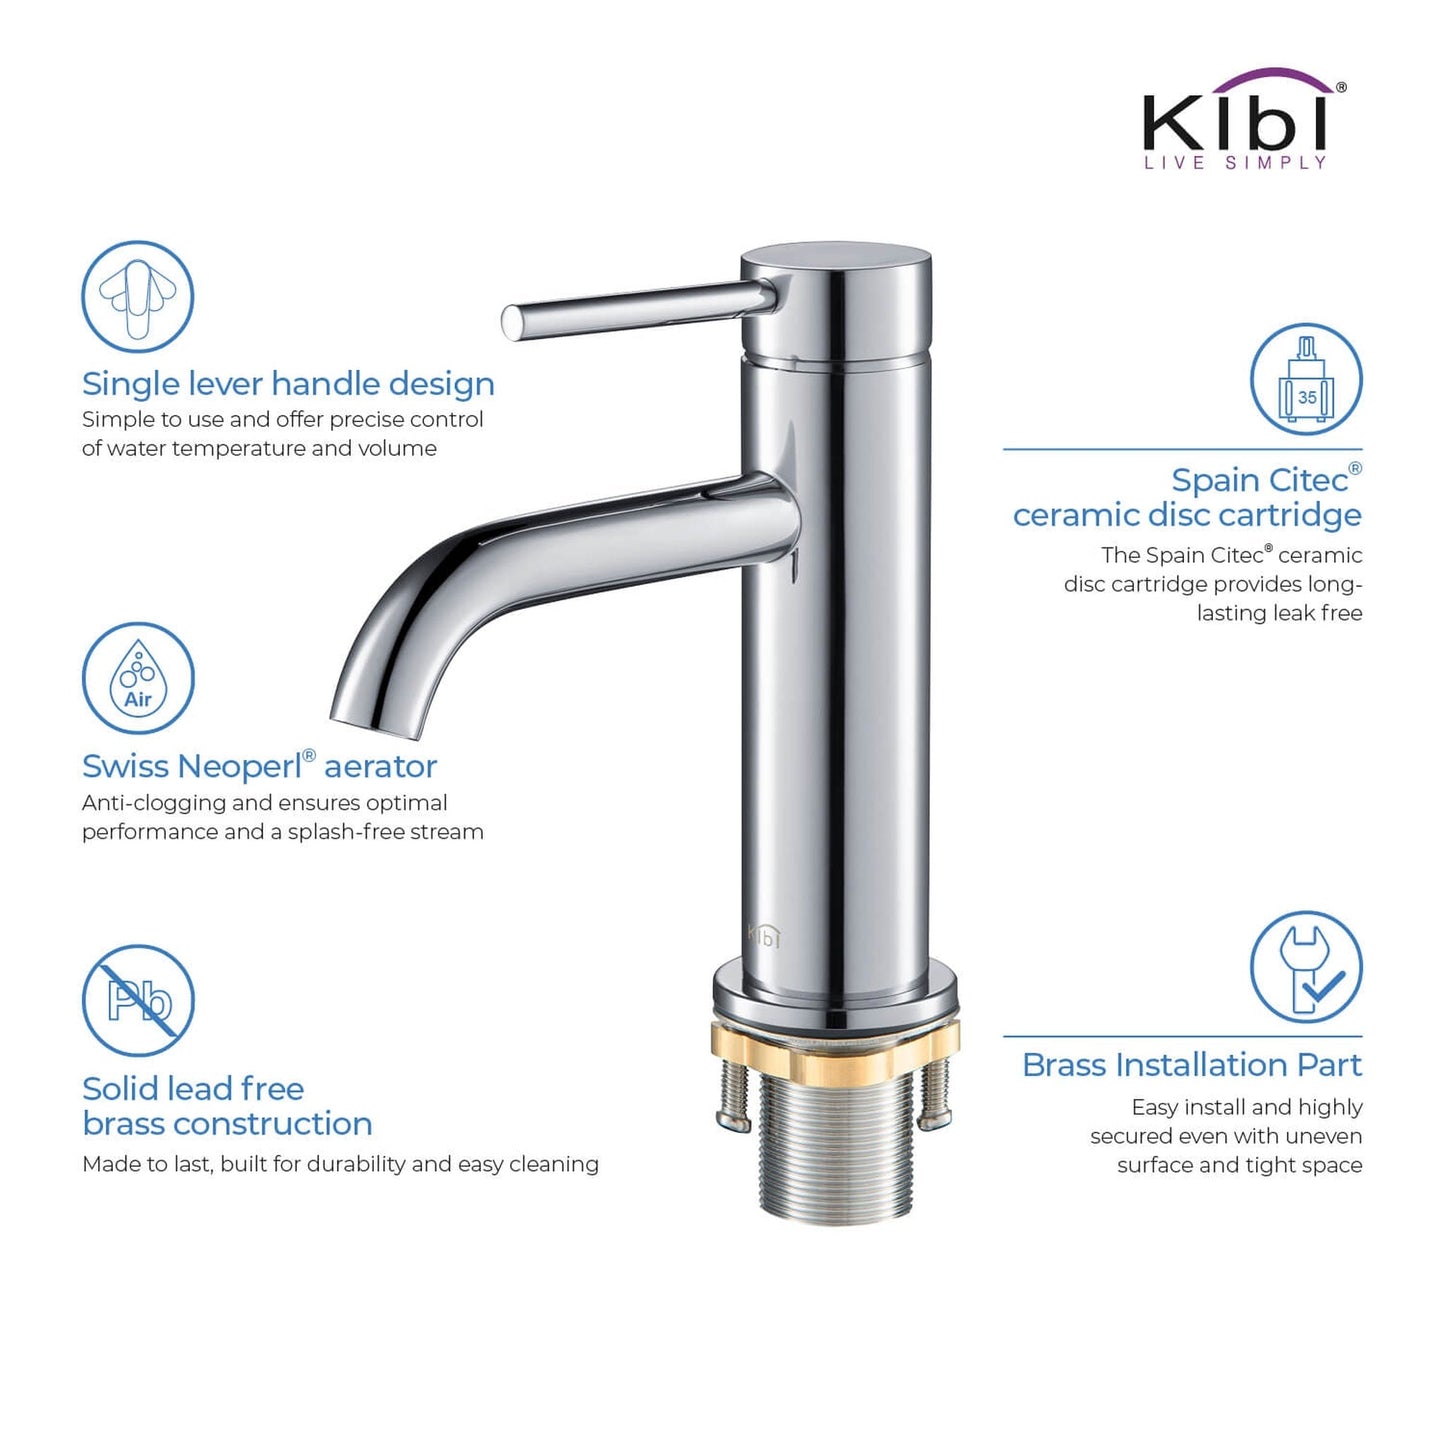 KIBI Circular Single Handle Chrome Solid Brass Bathroom Sink Faucet With Pop-Up Drain Stopper Small Cover With Overflow